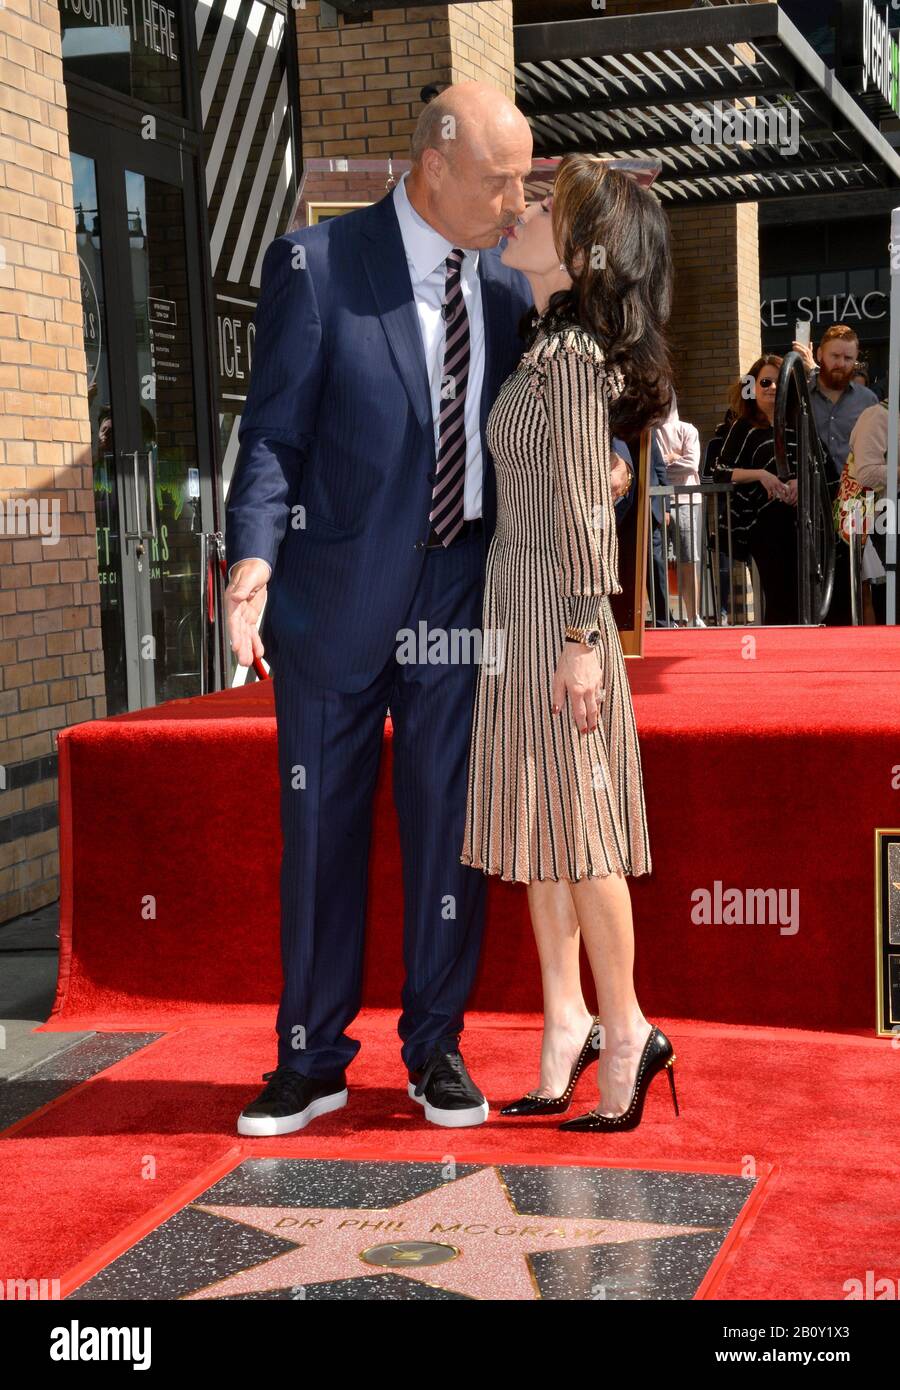 Los Angeles, USA. 21st Feb, 2020. LOS ANGELES, CA. February 21, 2020: Dr. Phil McGraw & Robin McGraw at the Hollywood Walk of Fame Star Ceremony honoring Dr Phil McGraw. Pictures Credit: Paul Smith/Alamy Live News Stock Photo